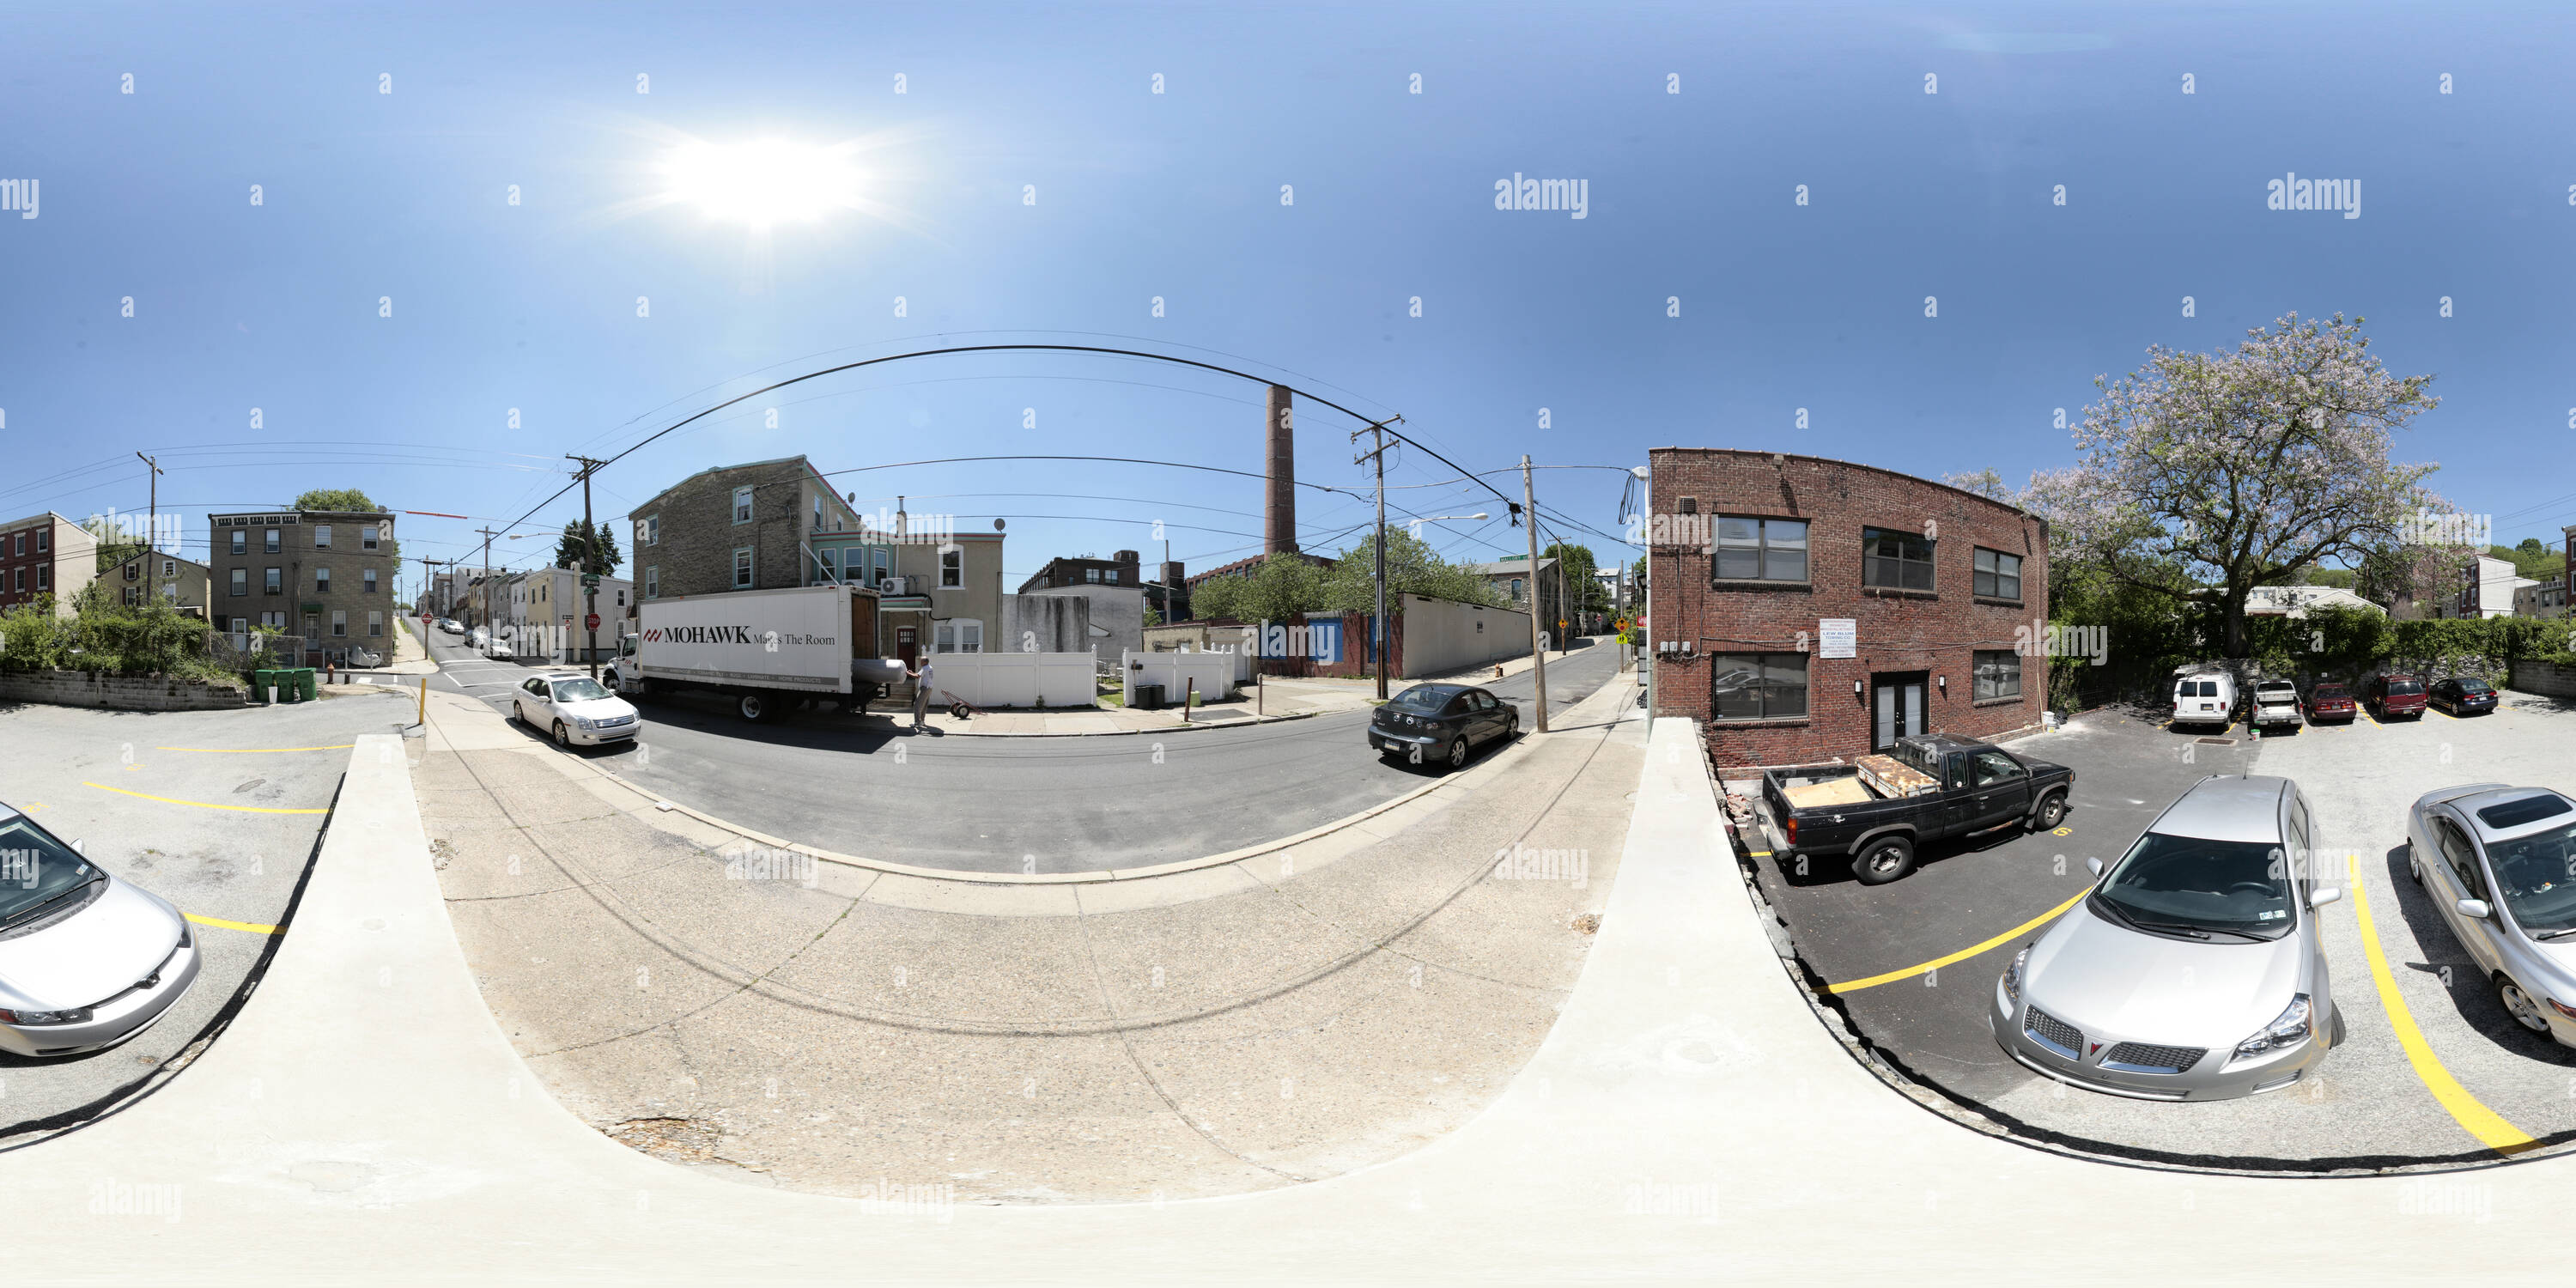 360 degree panoramic view of Wilde and Krams